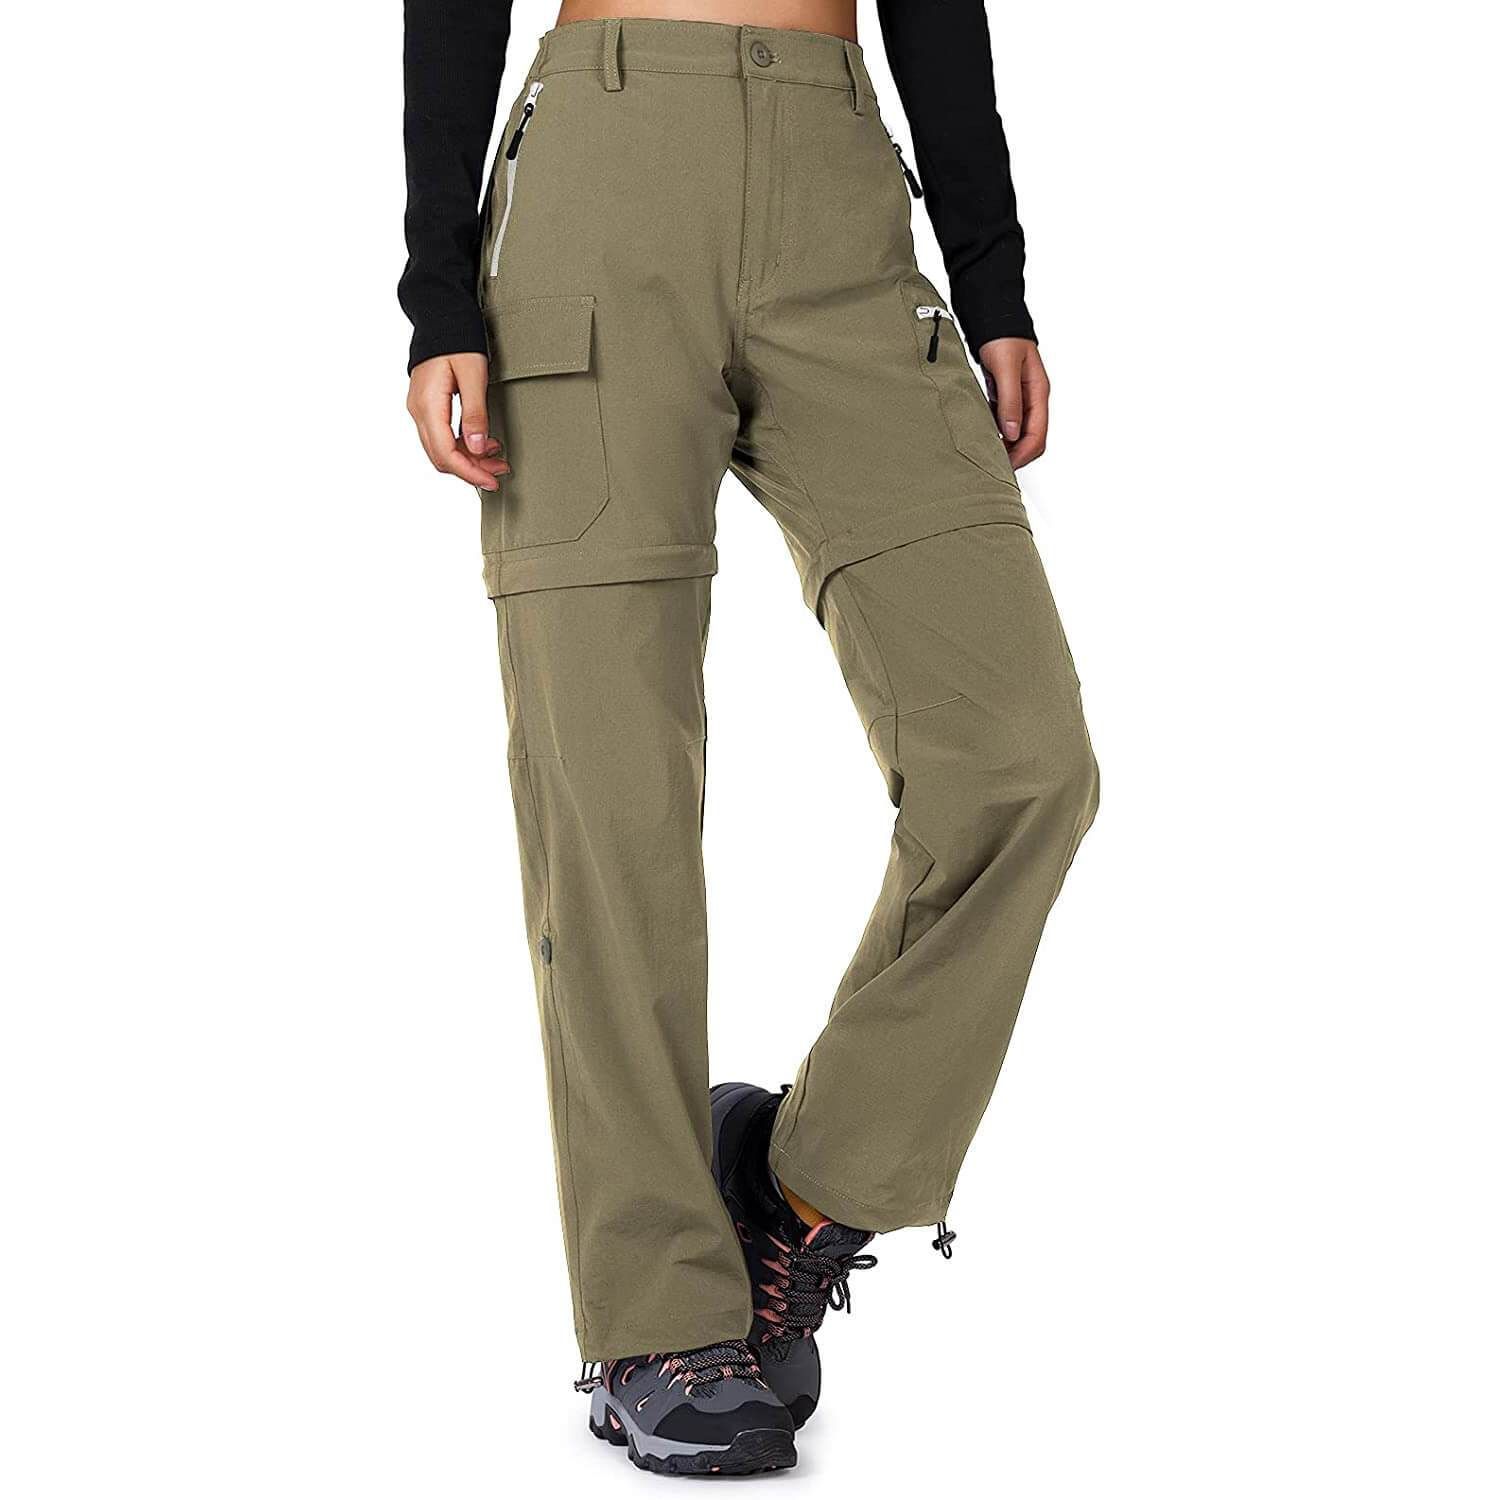 Comfortable and stylish hiking pants for
adventurous spots